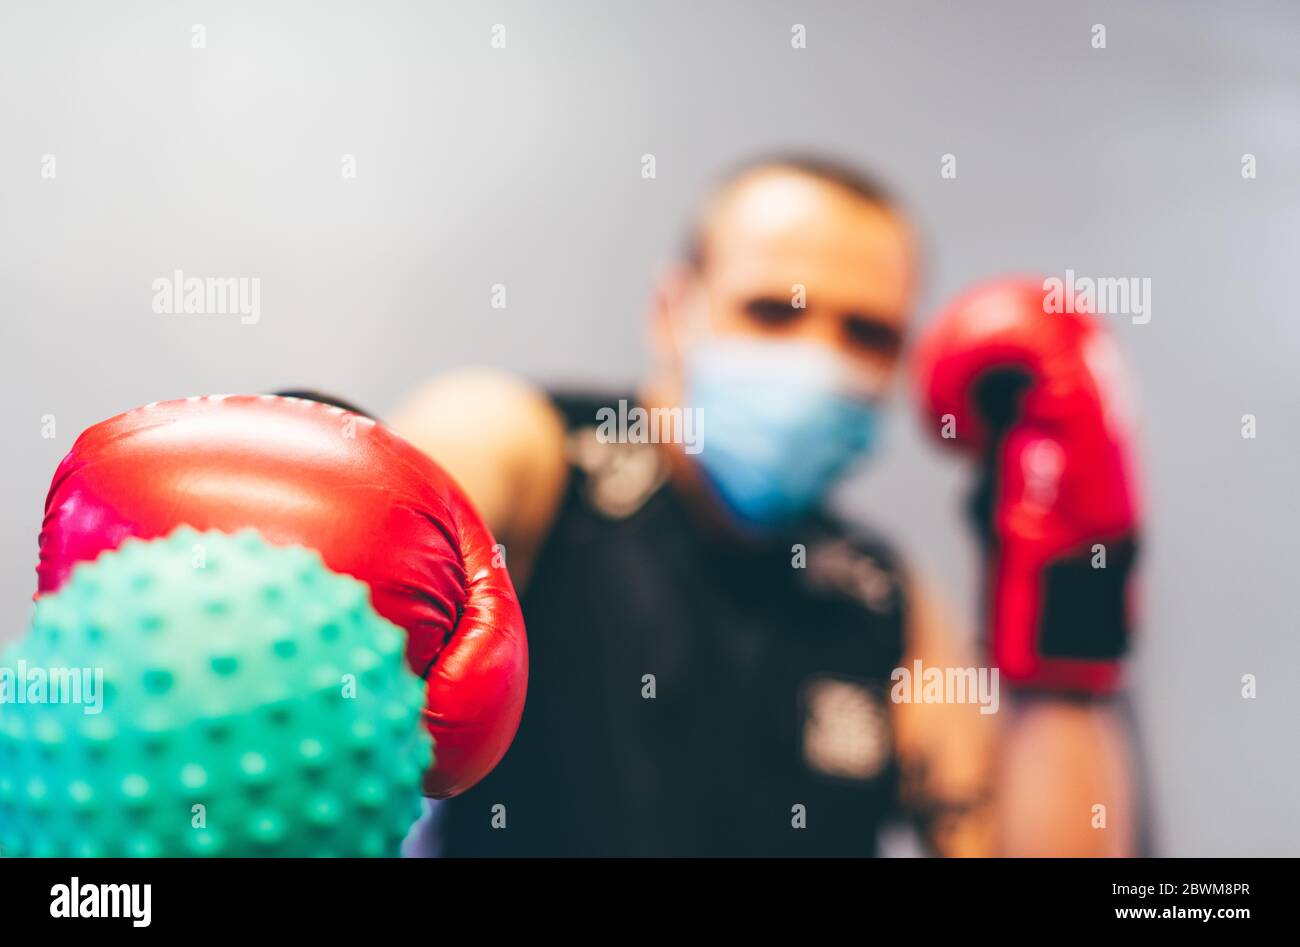 boxer with mask and red gloves fighting against coronavirus. Concept of overcoming the virus Stock Photo